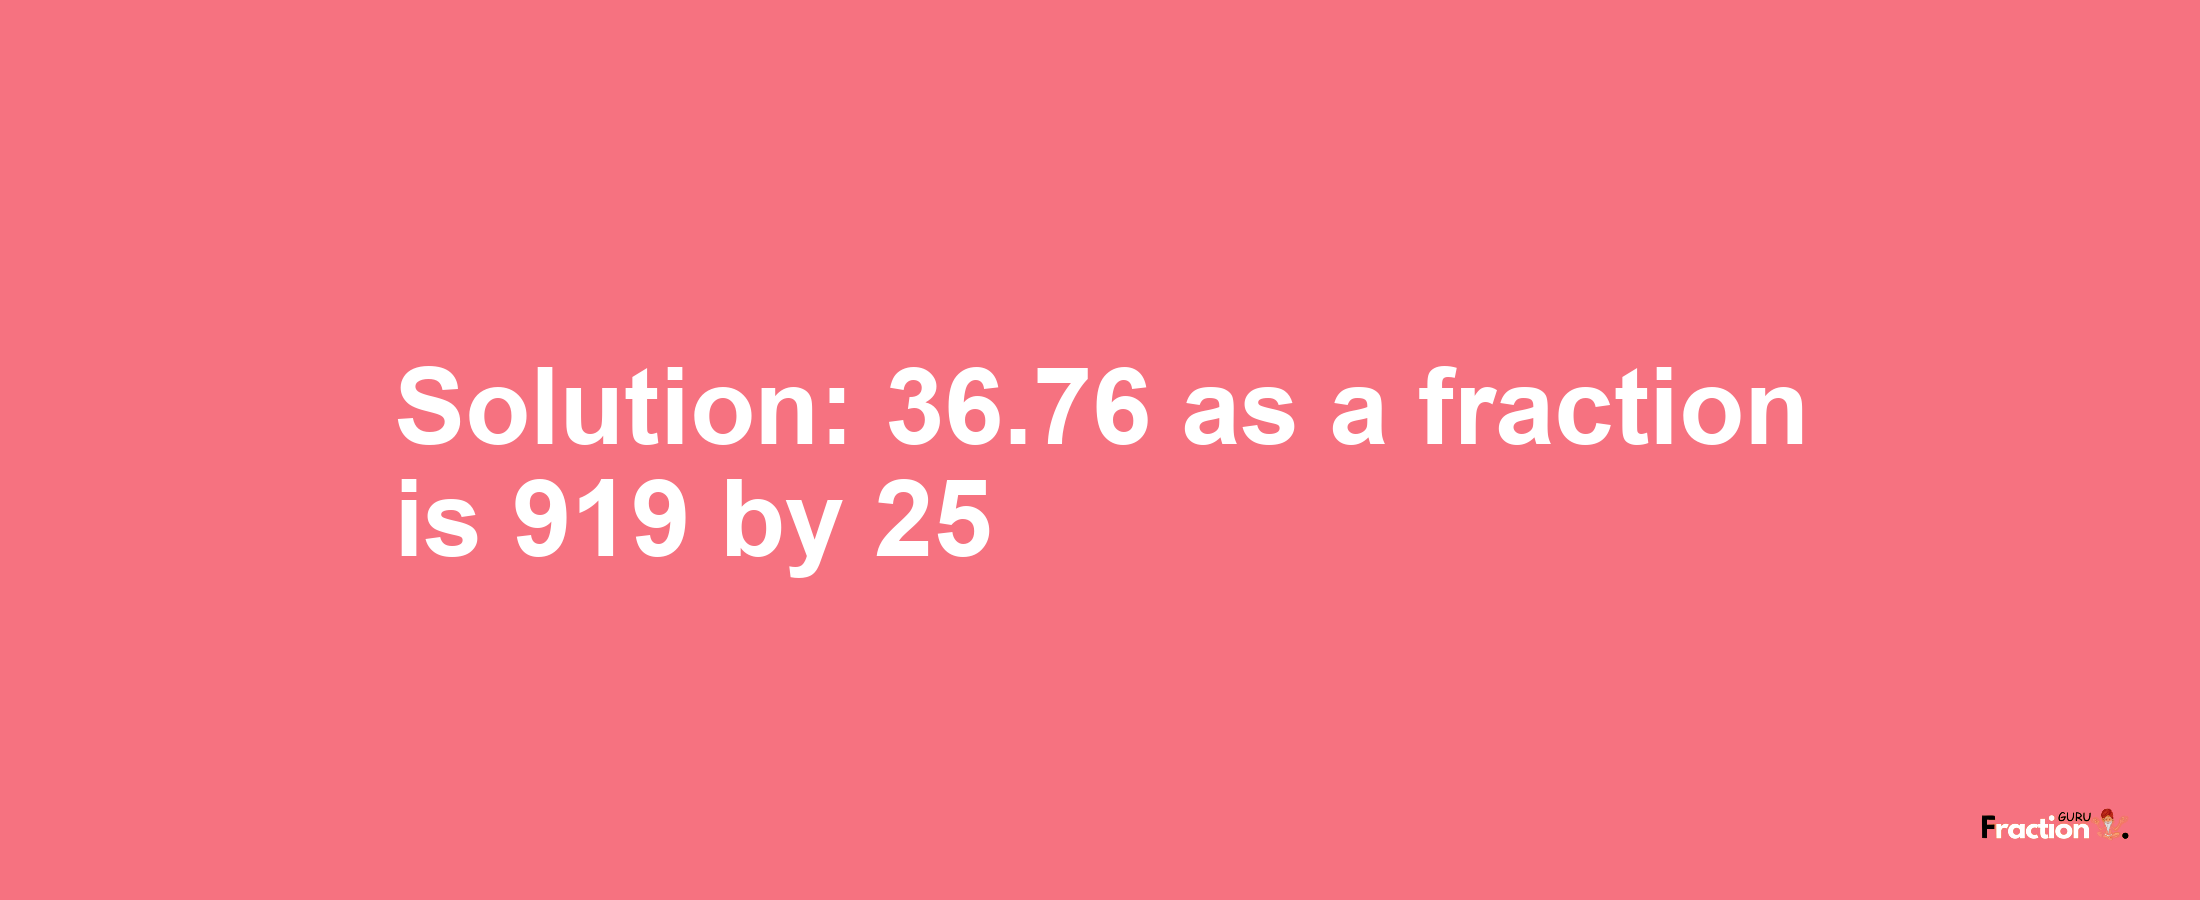 Solution:36.76 as a fraction is 919/25